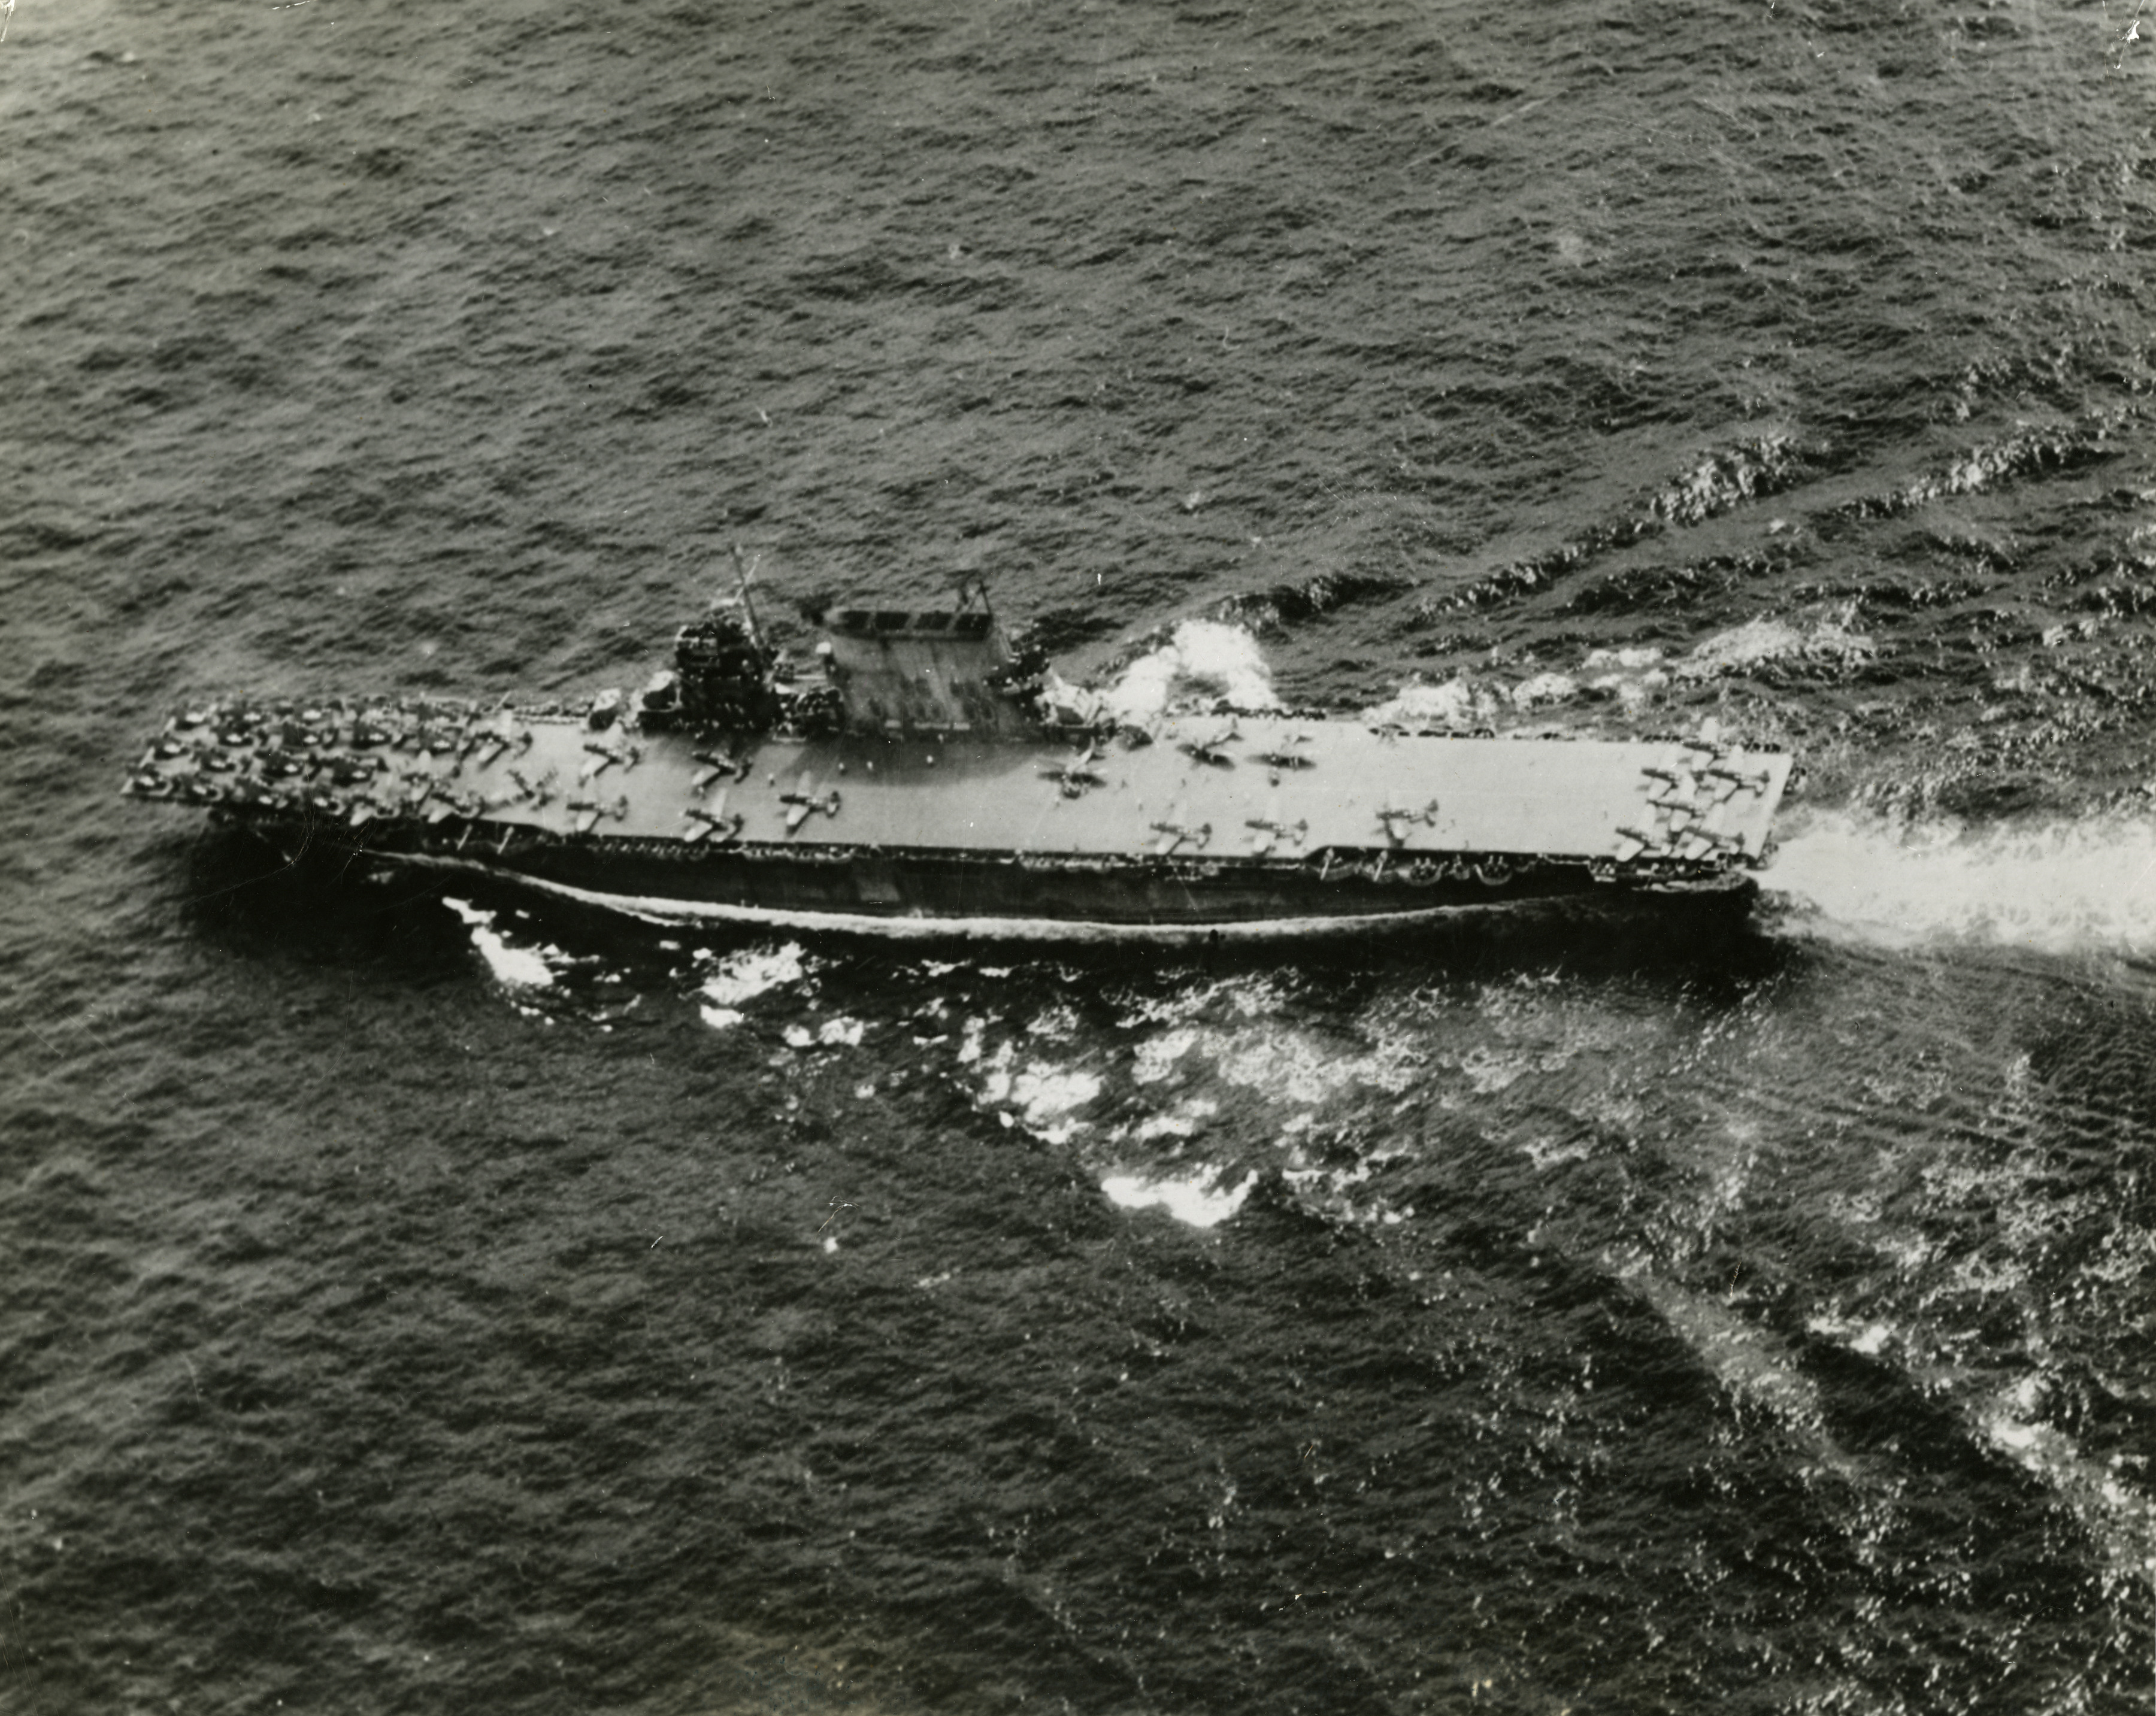 Uss Saratoga Cv Aircraft Carrier Wwii From Wikipedia Flickr | My XXX ...